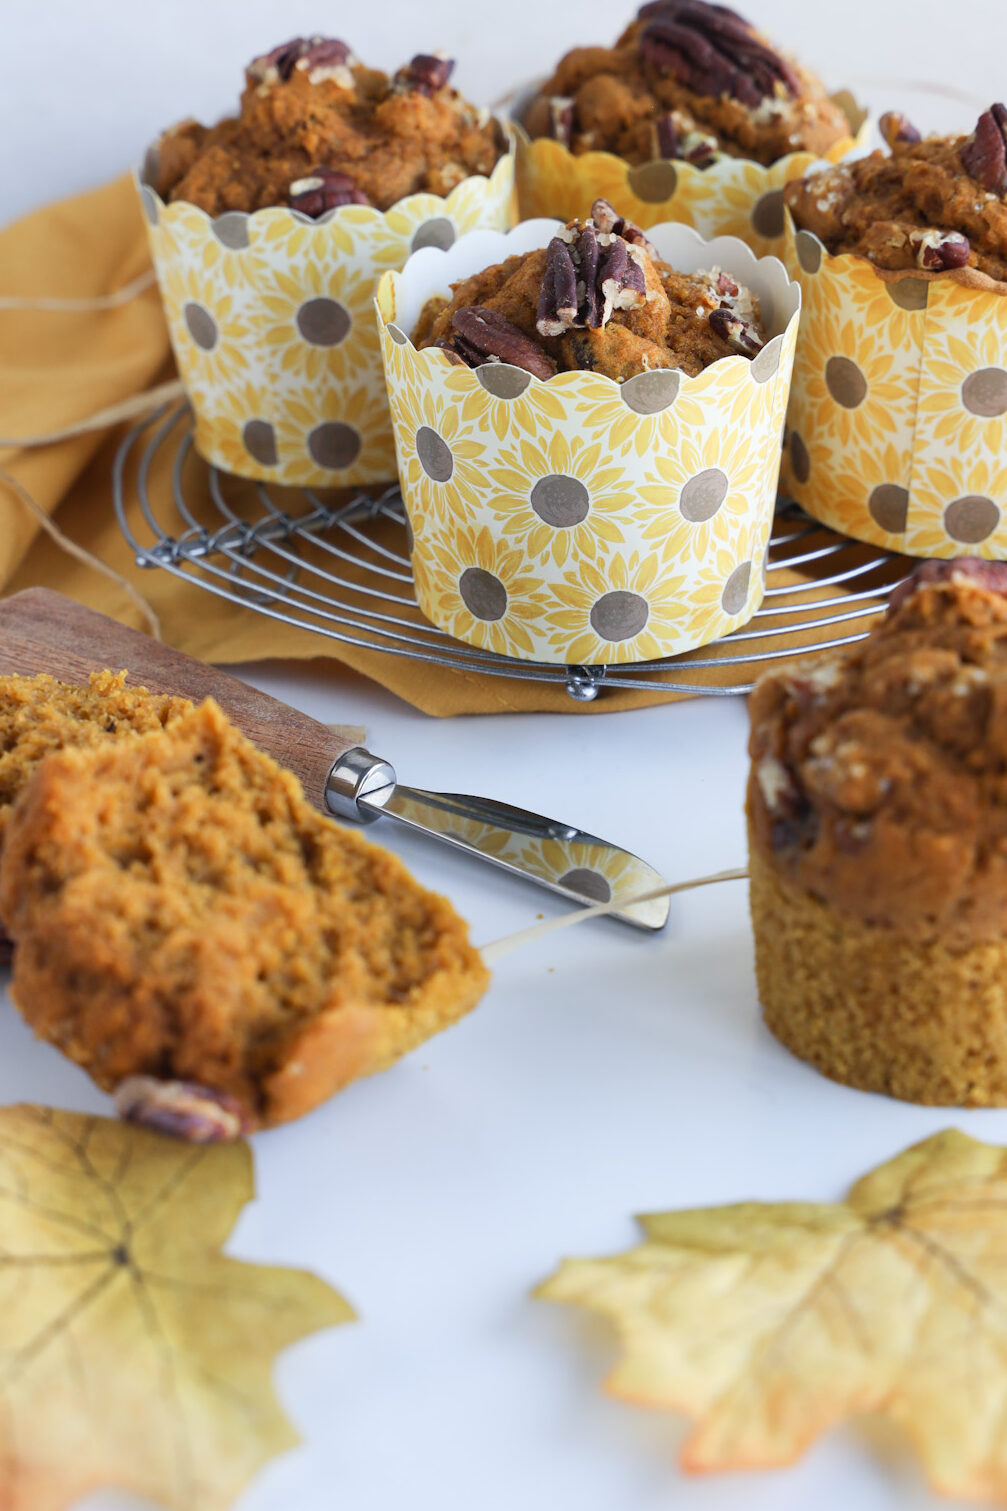 Incredibly moist and packed with flavour these gluten-free pumpkin muffins are perfect for fall.